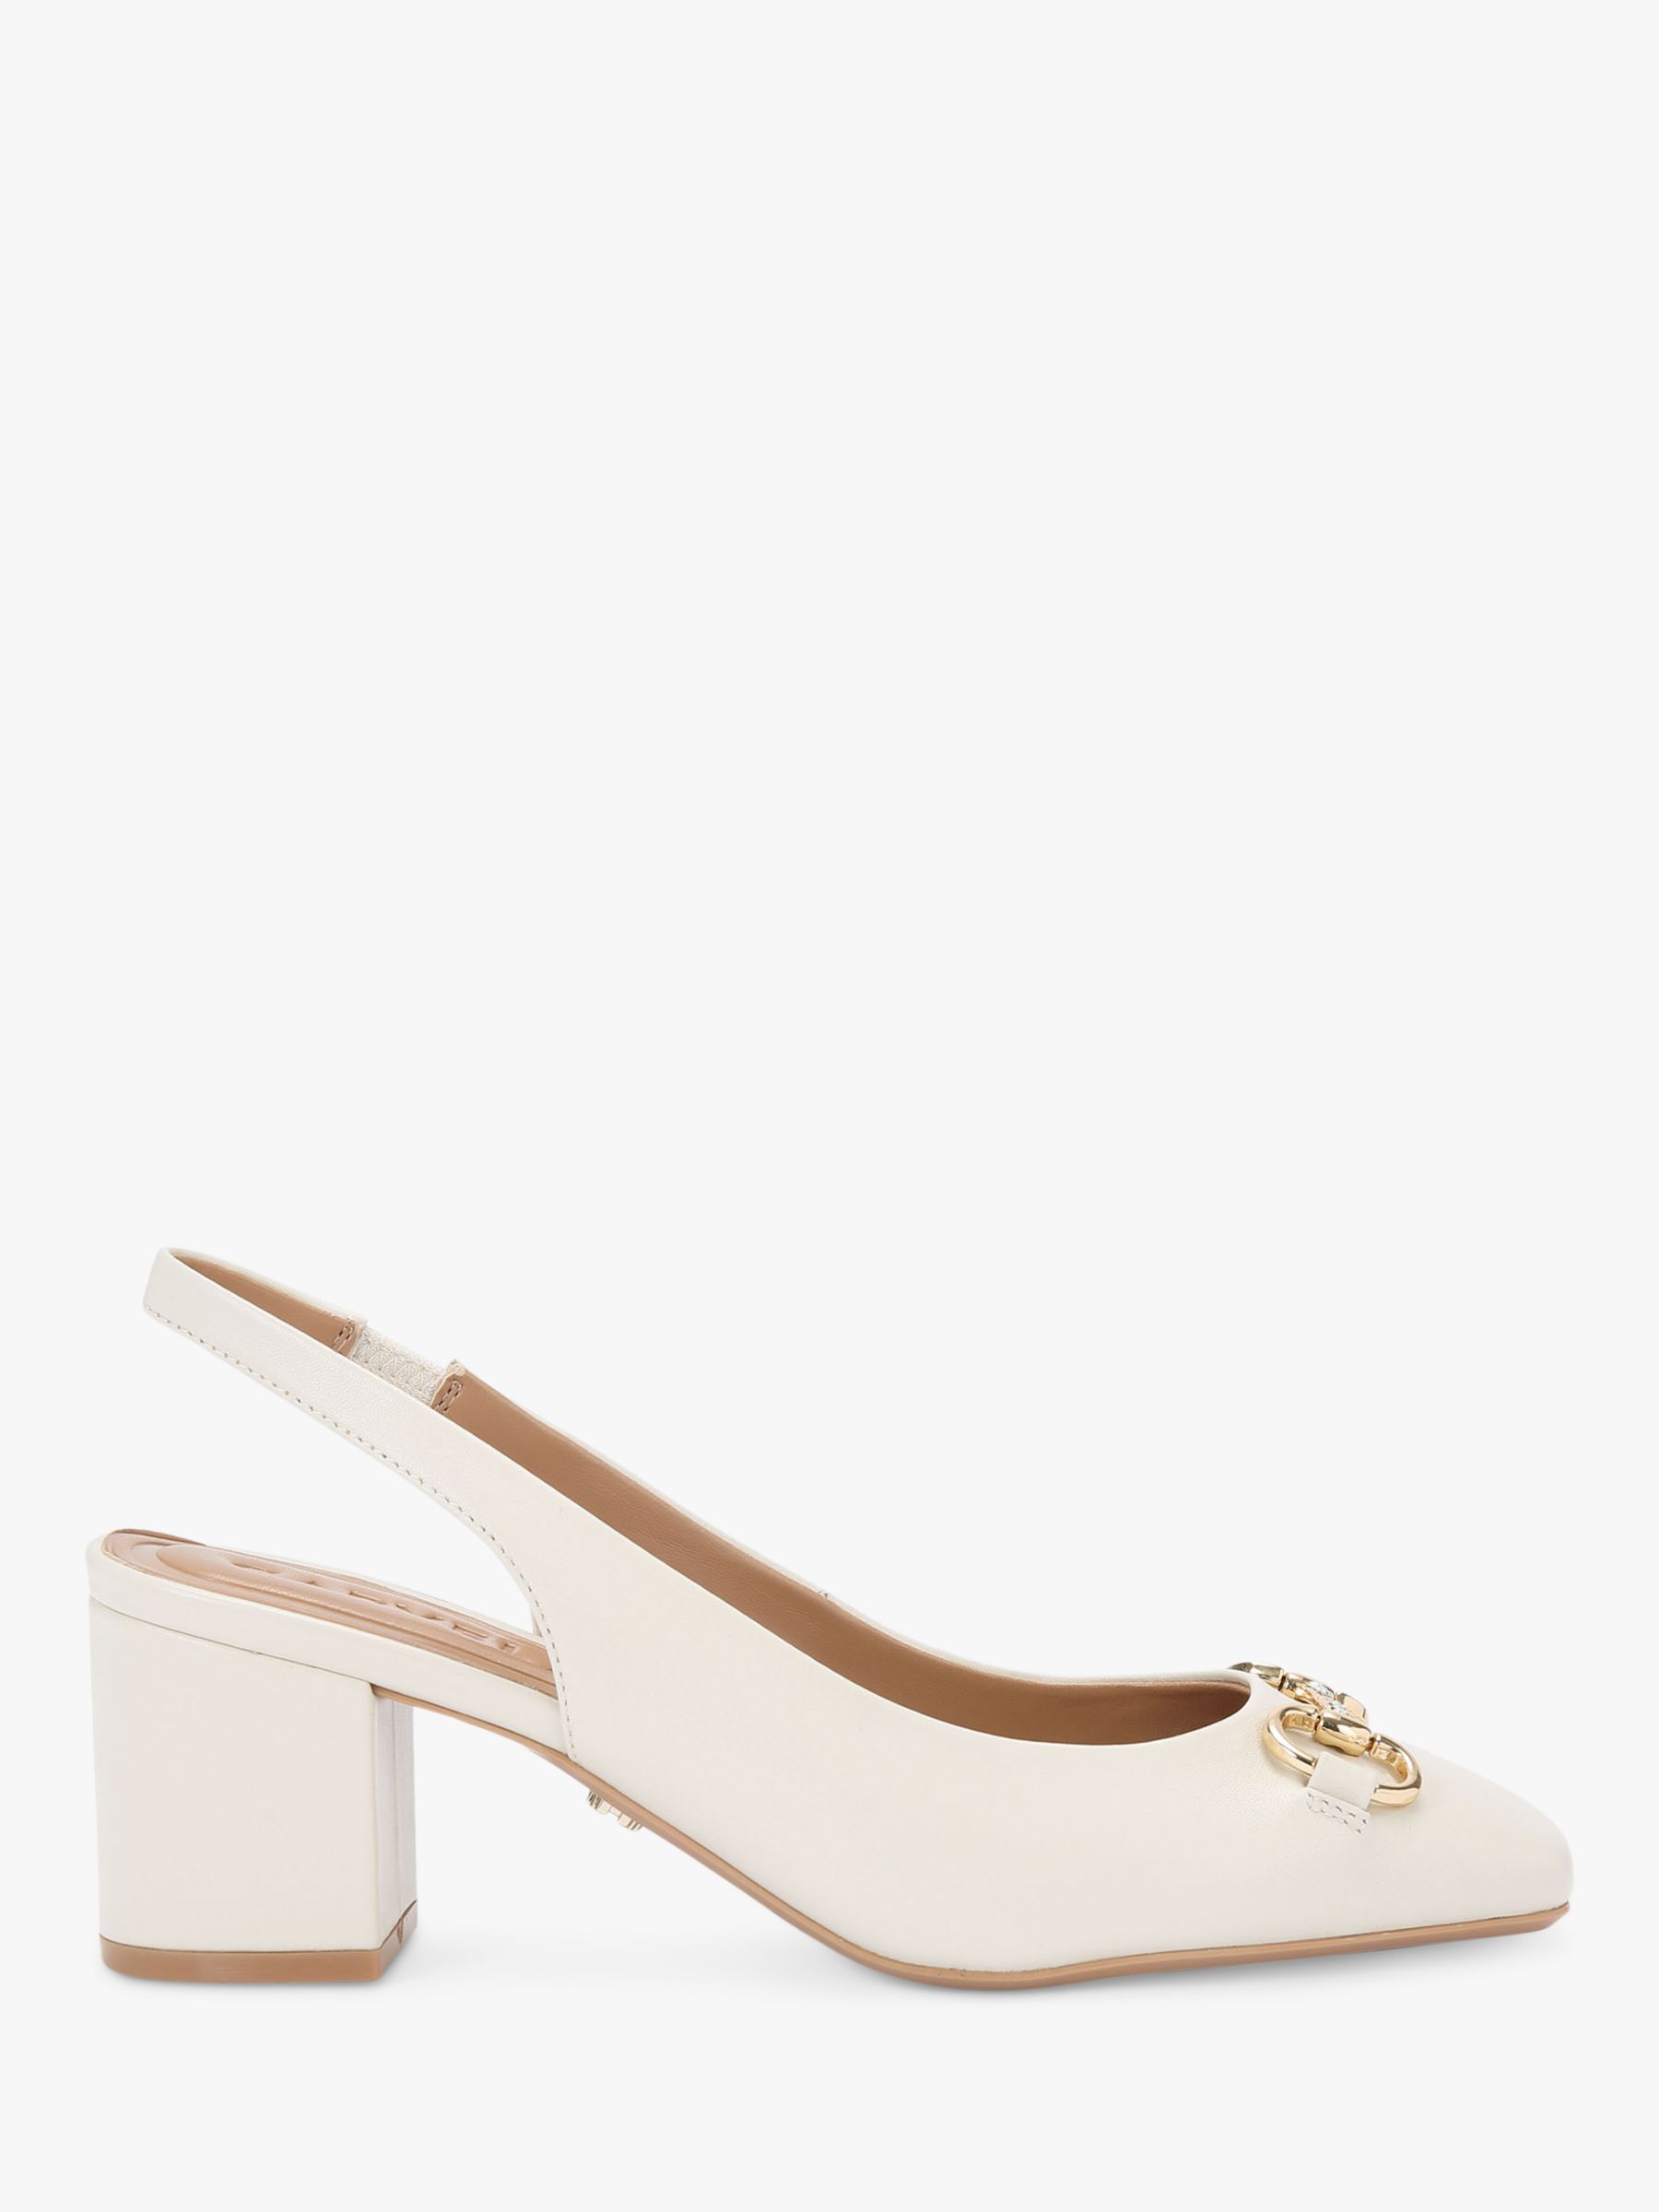 Carvela Poise Slingback Court Shoes, Natural Putty at John Lewis & Partners